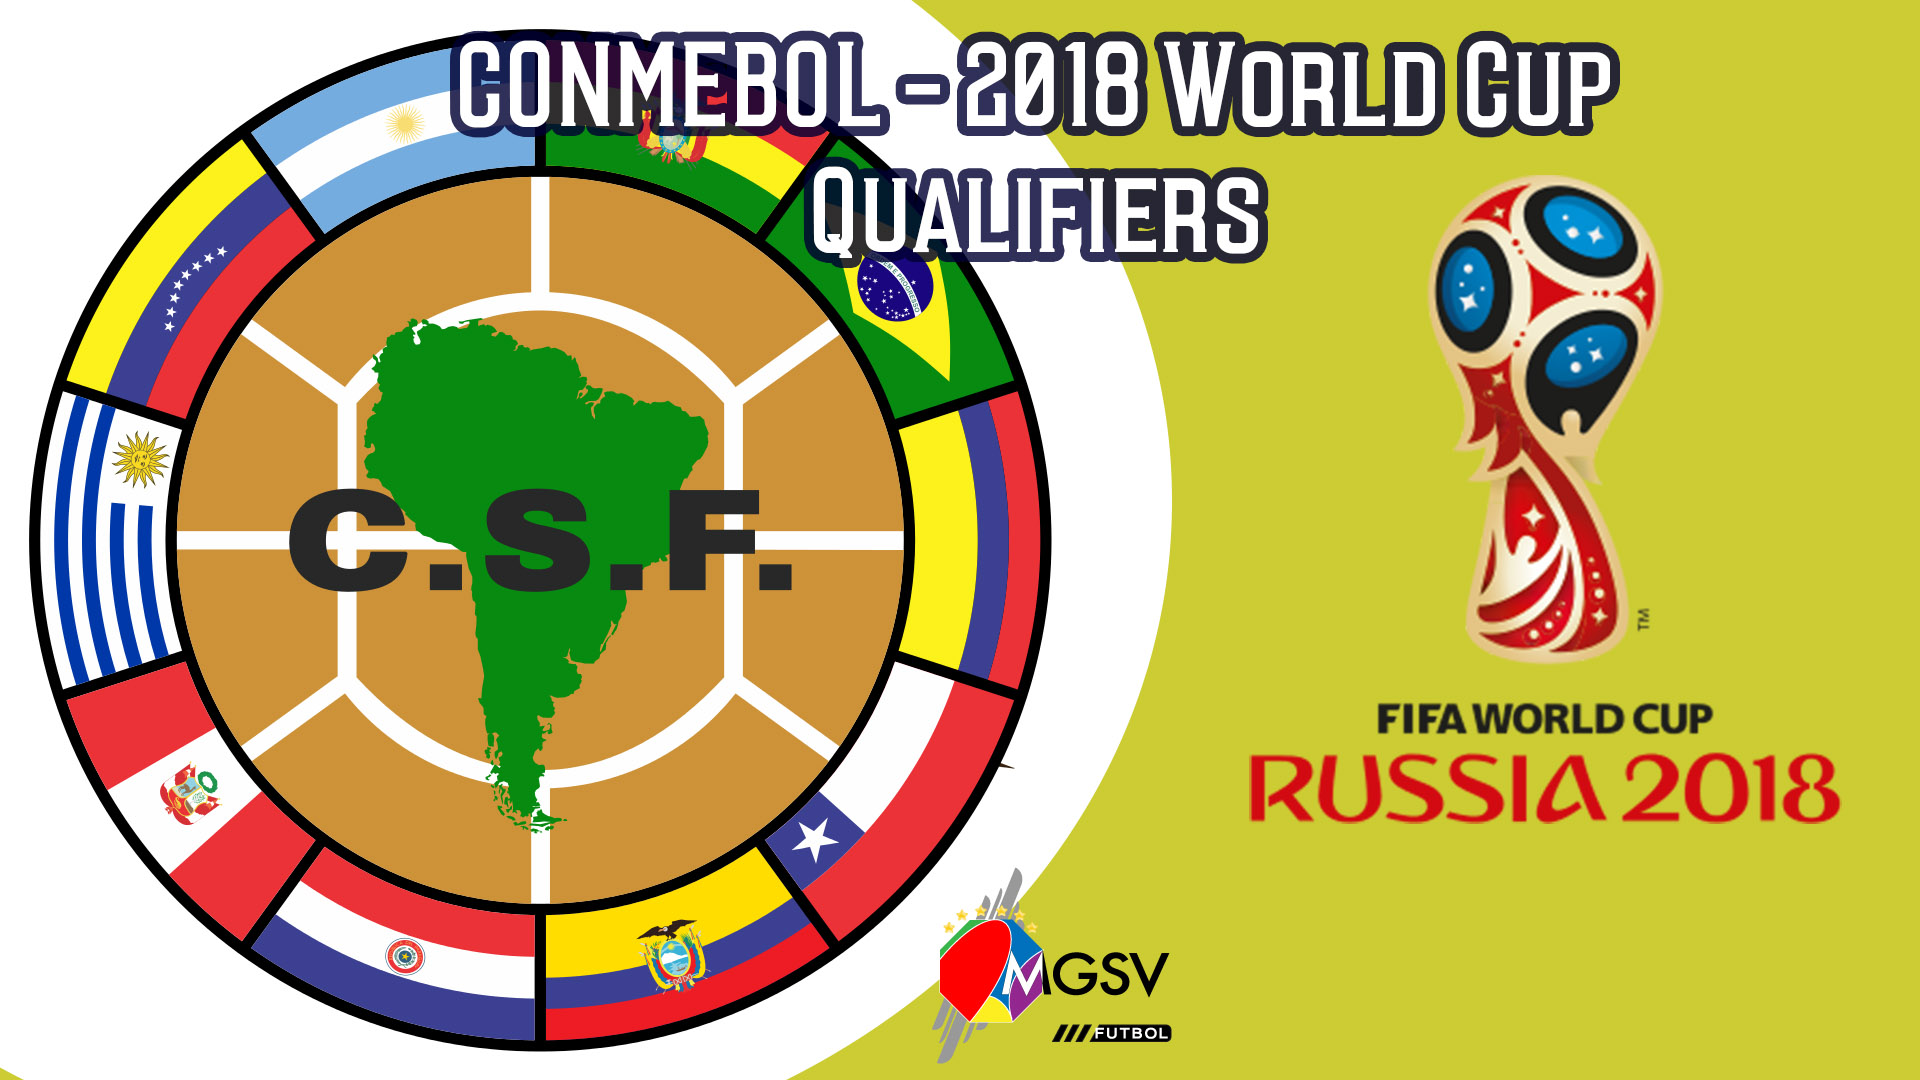 The ‘CONMEBOL’ FIFA World Cup qualifiers MGSVfutbol